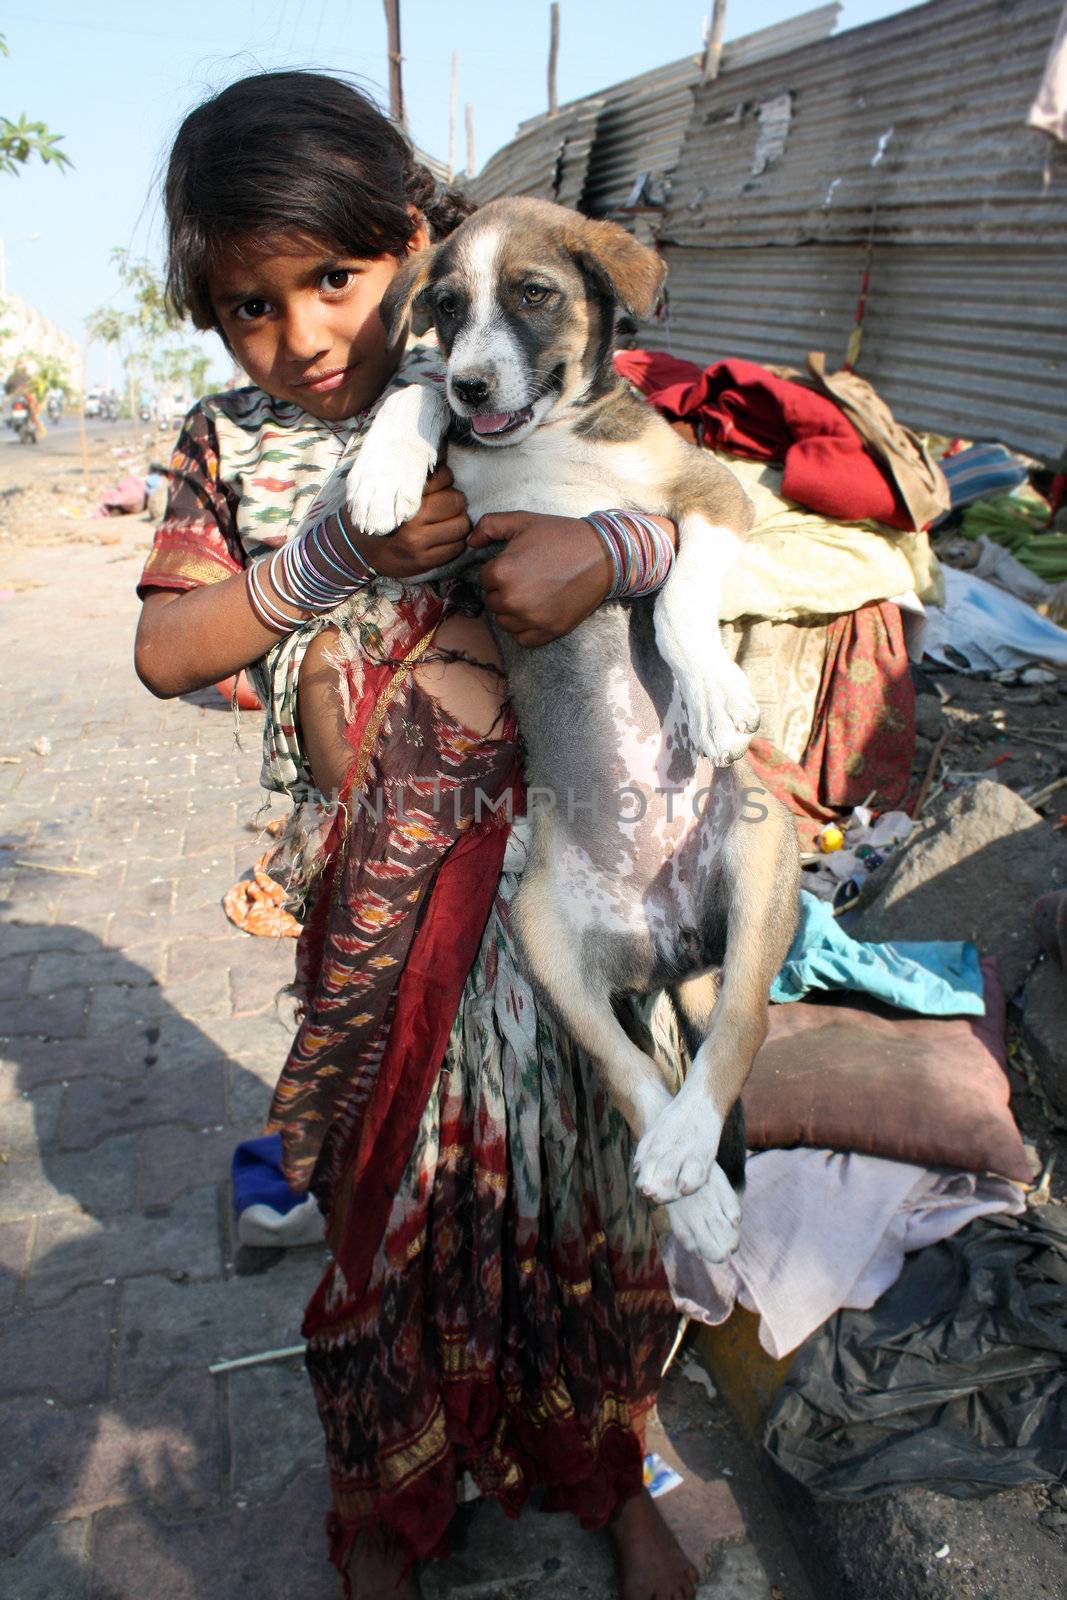 A poor beggar girl from India posing with her street dog, on the street-side.